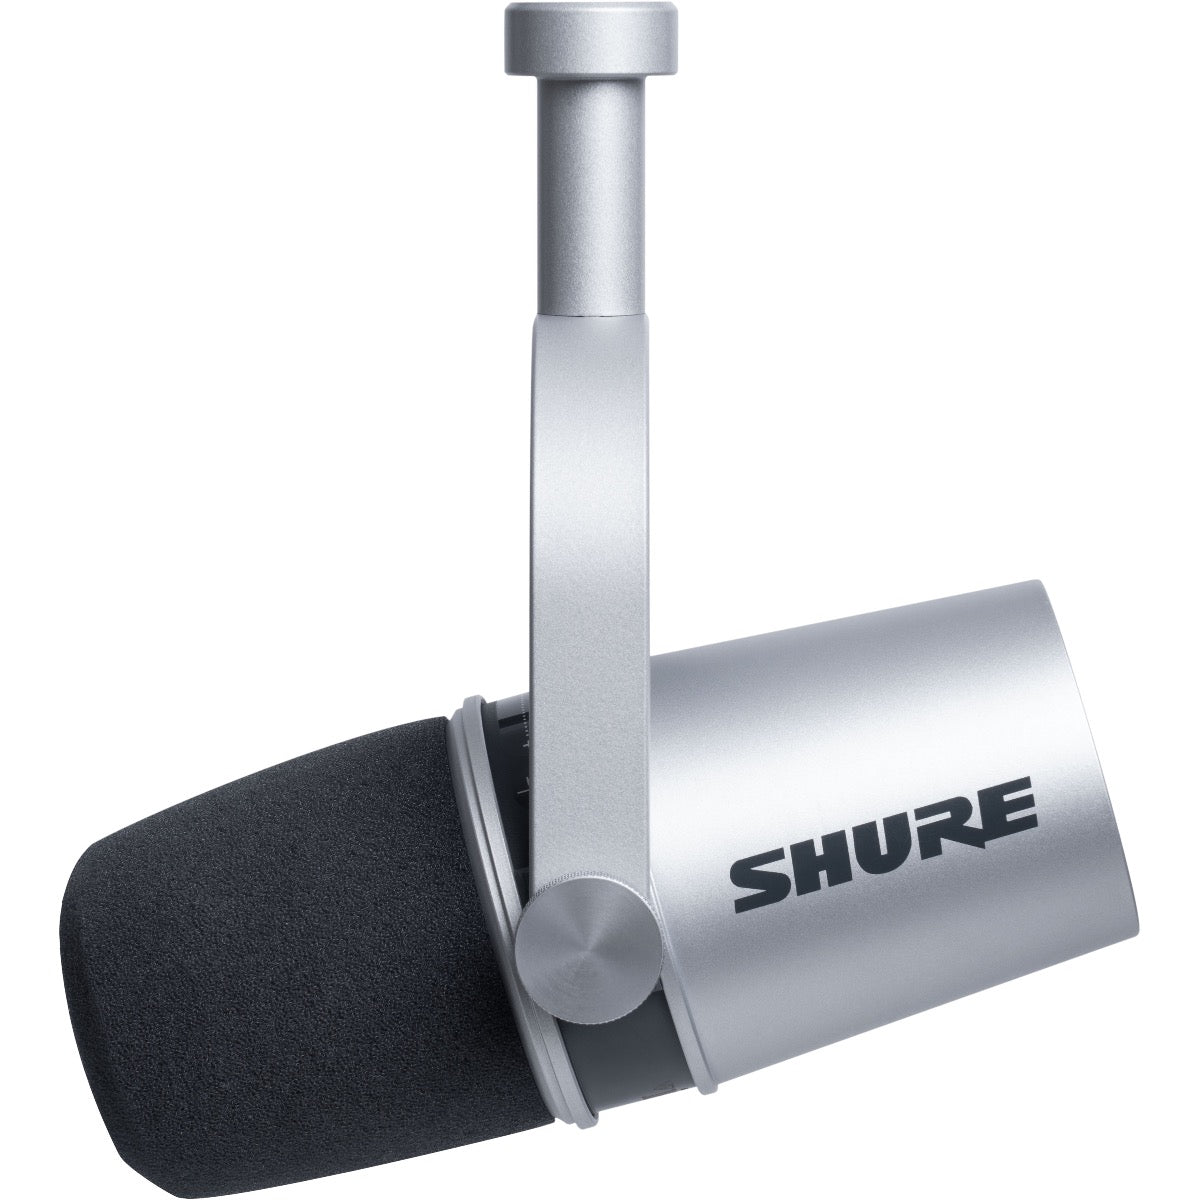 Shop  Shure MV7S Podcast Microphone - Silver